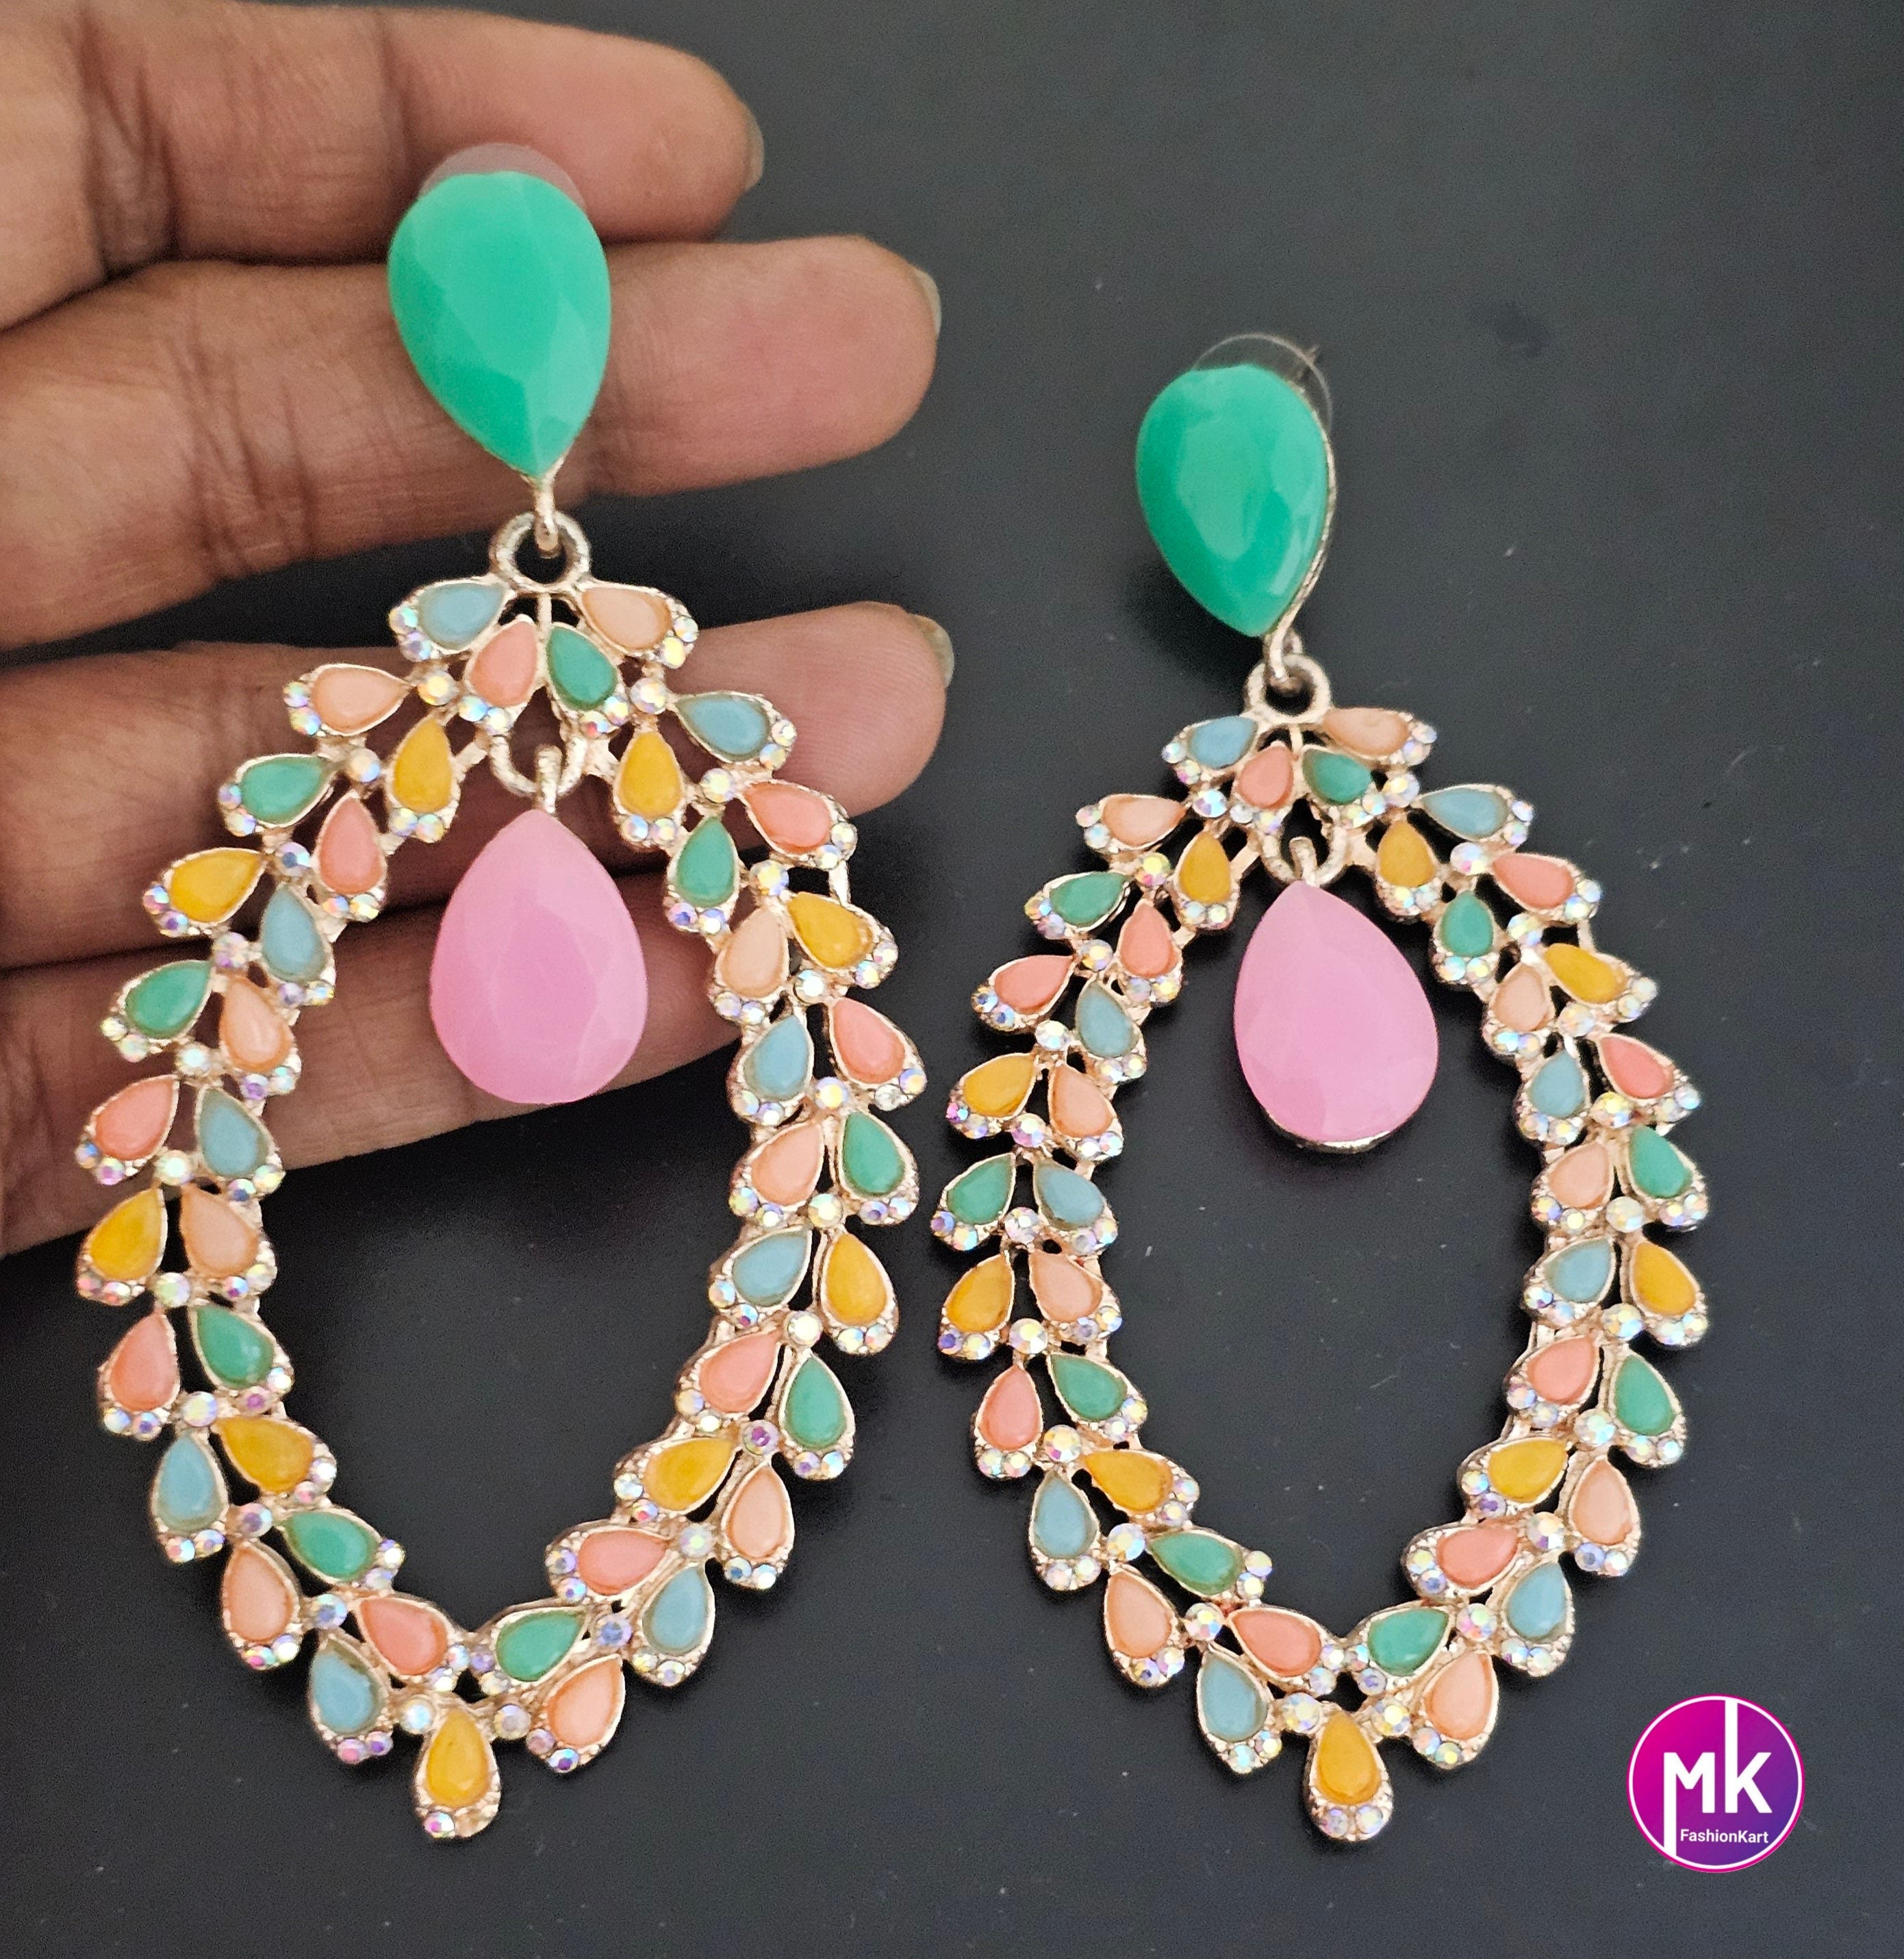 Bollywood Premium quality Multi-color stone Long Earrings